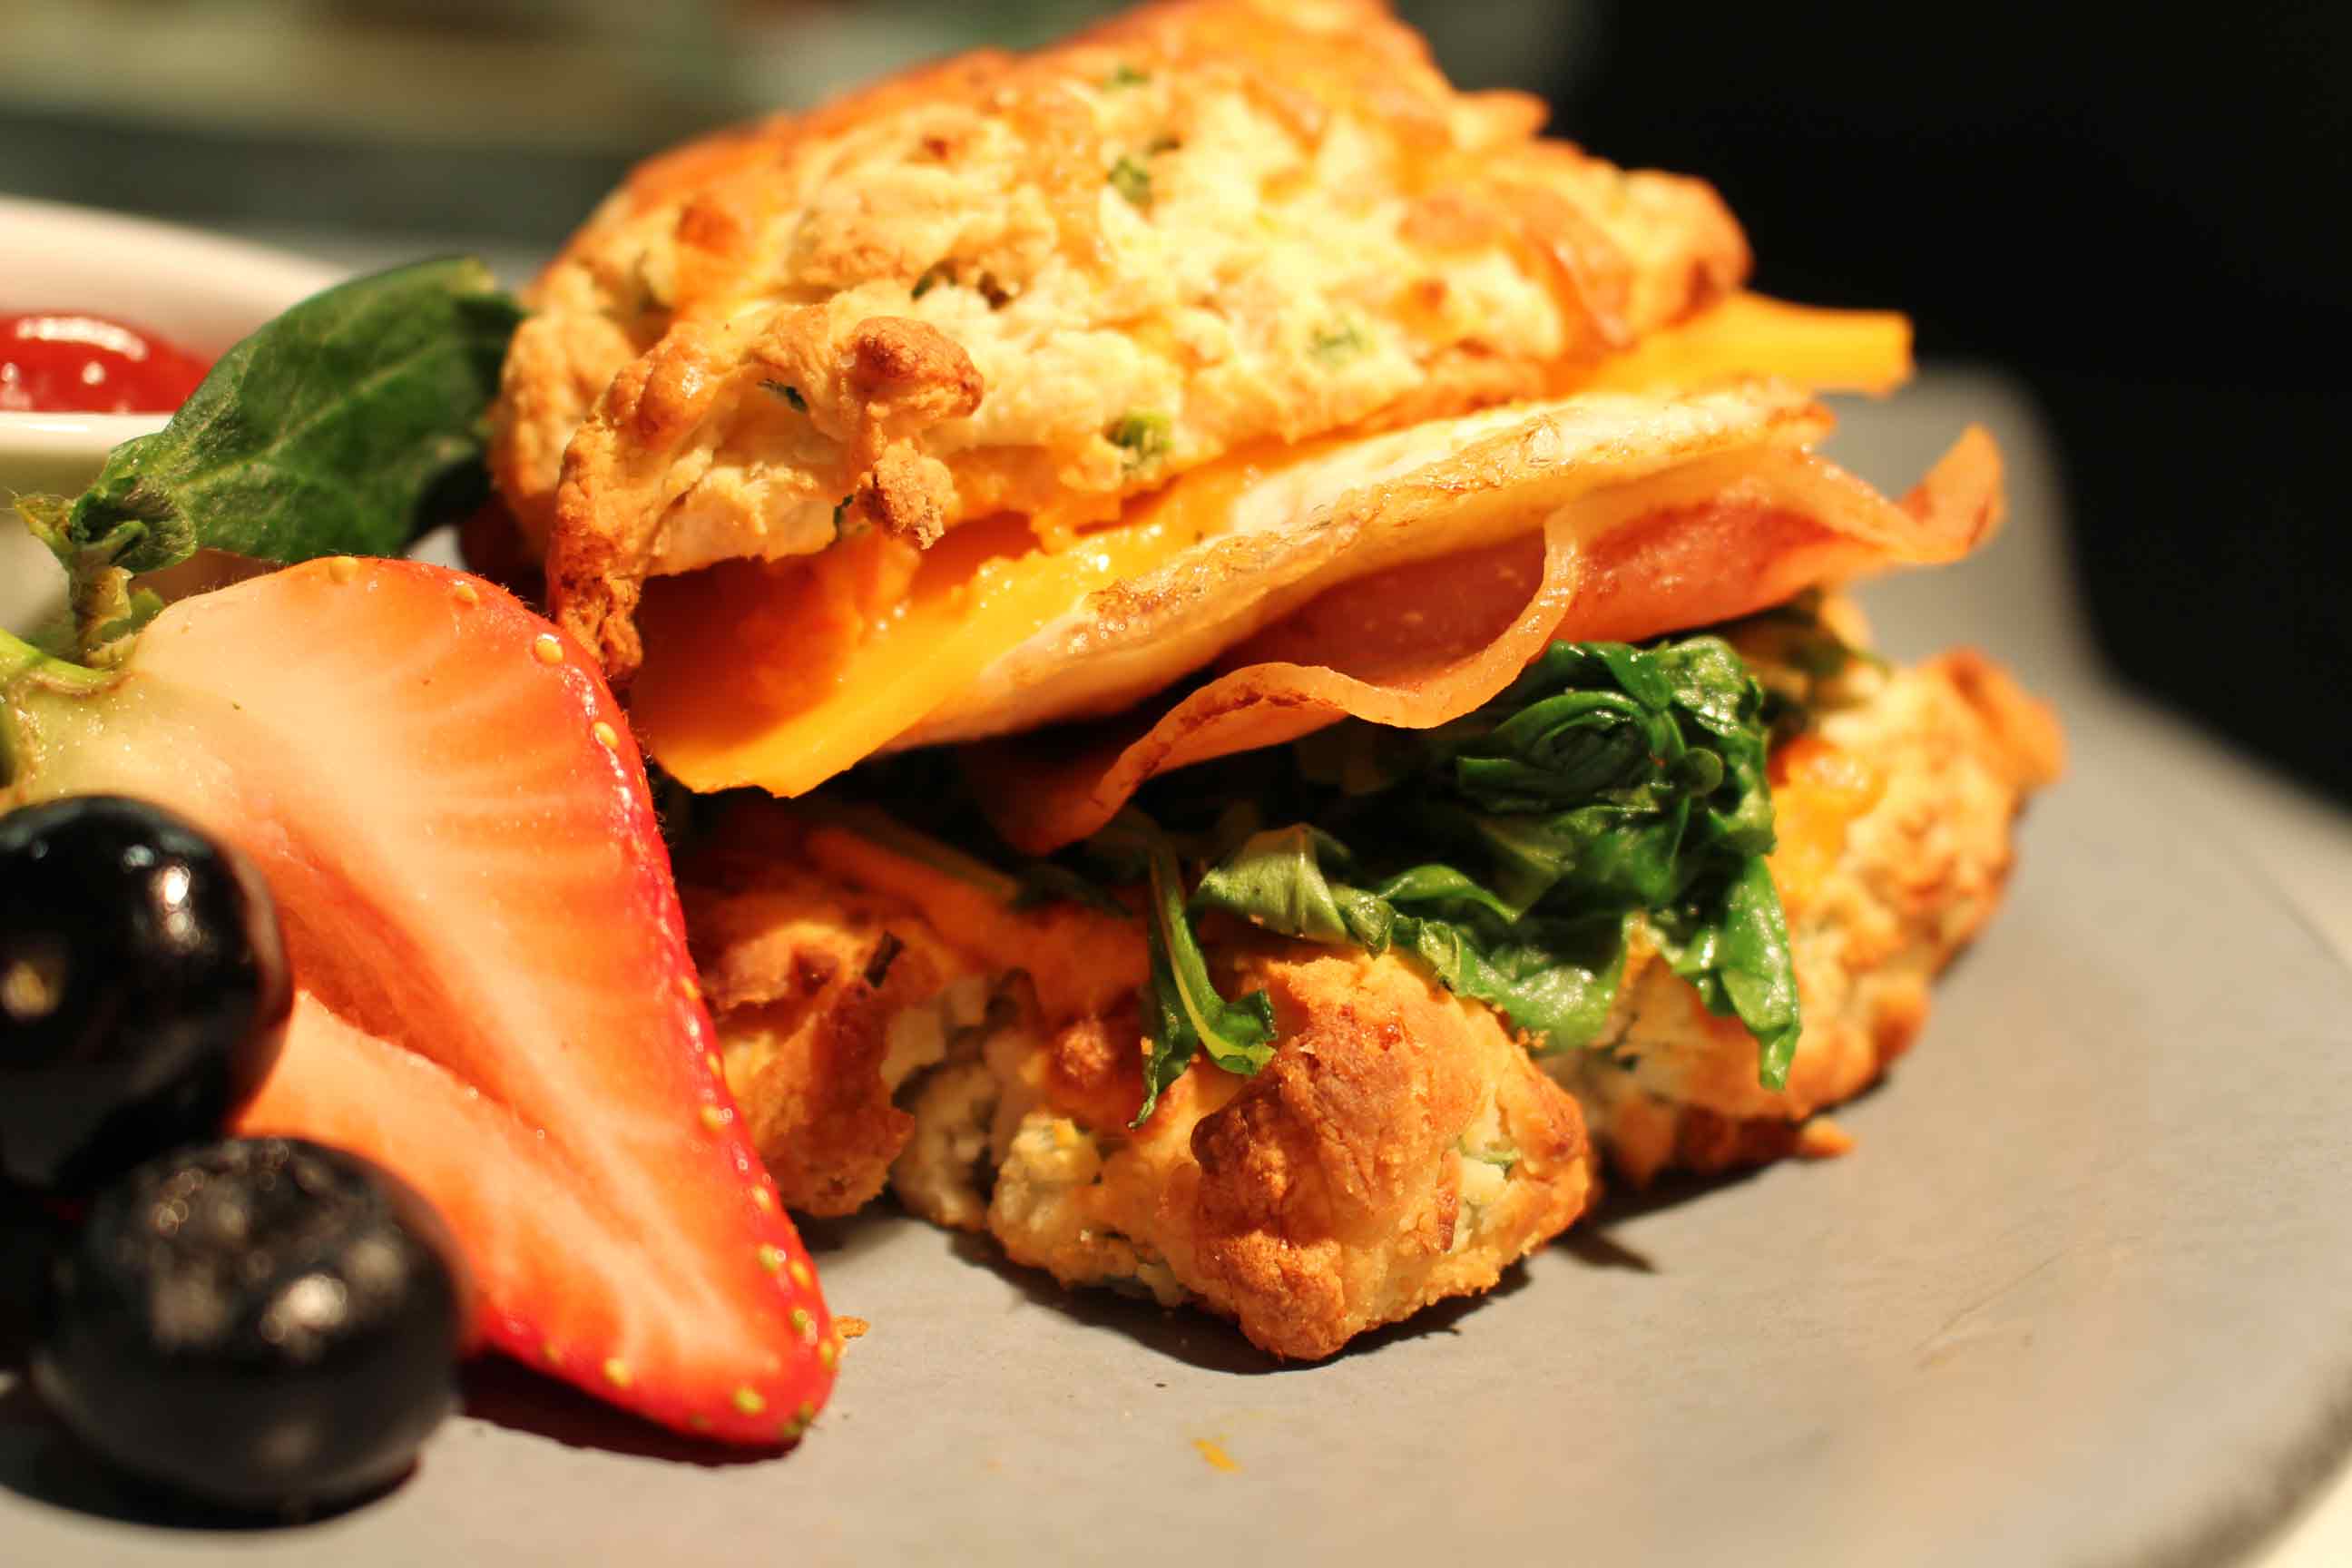 A sandwich made on a cheddar biscuit